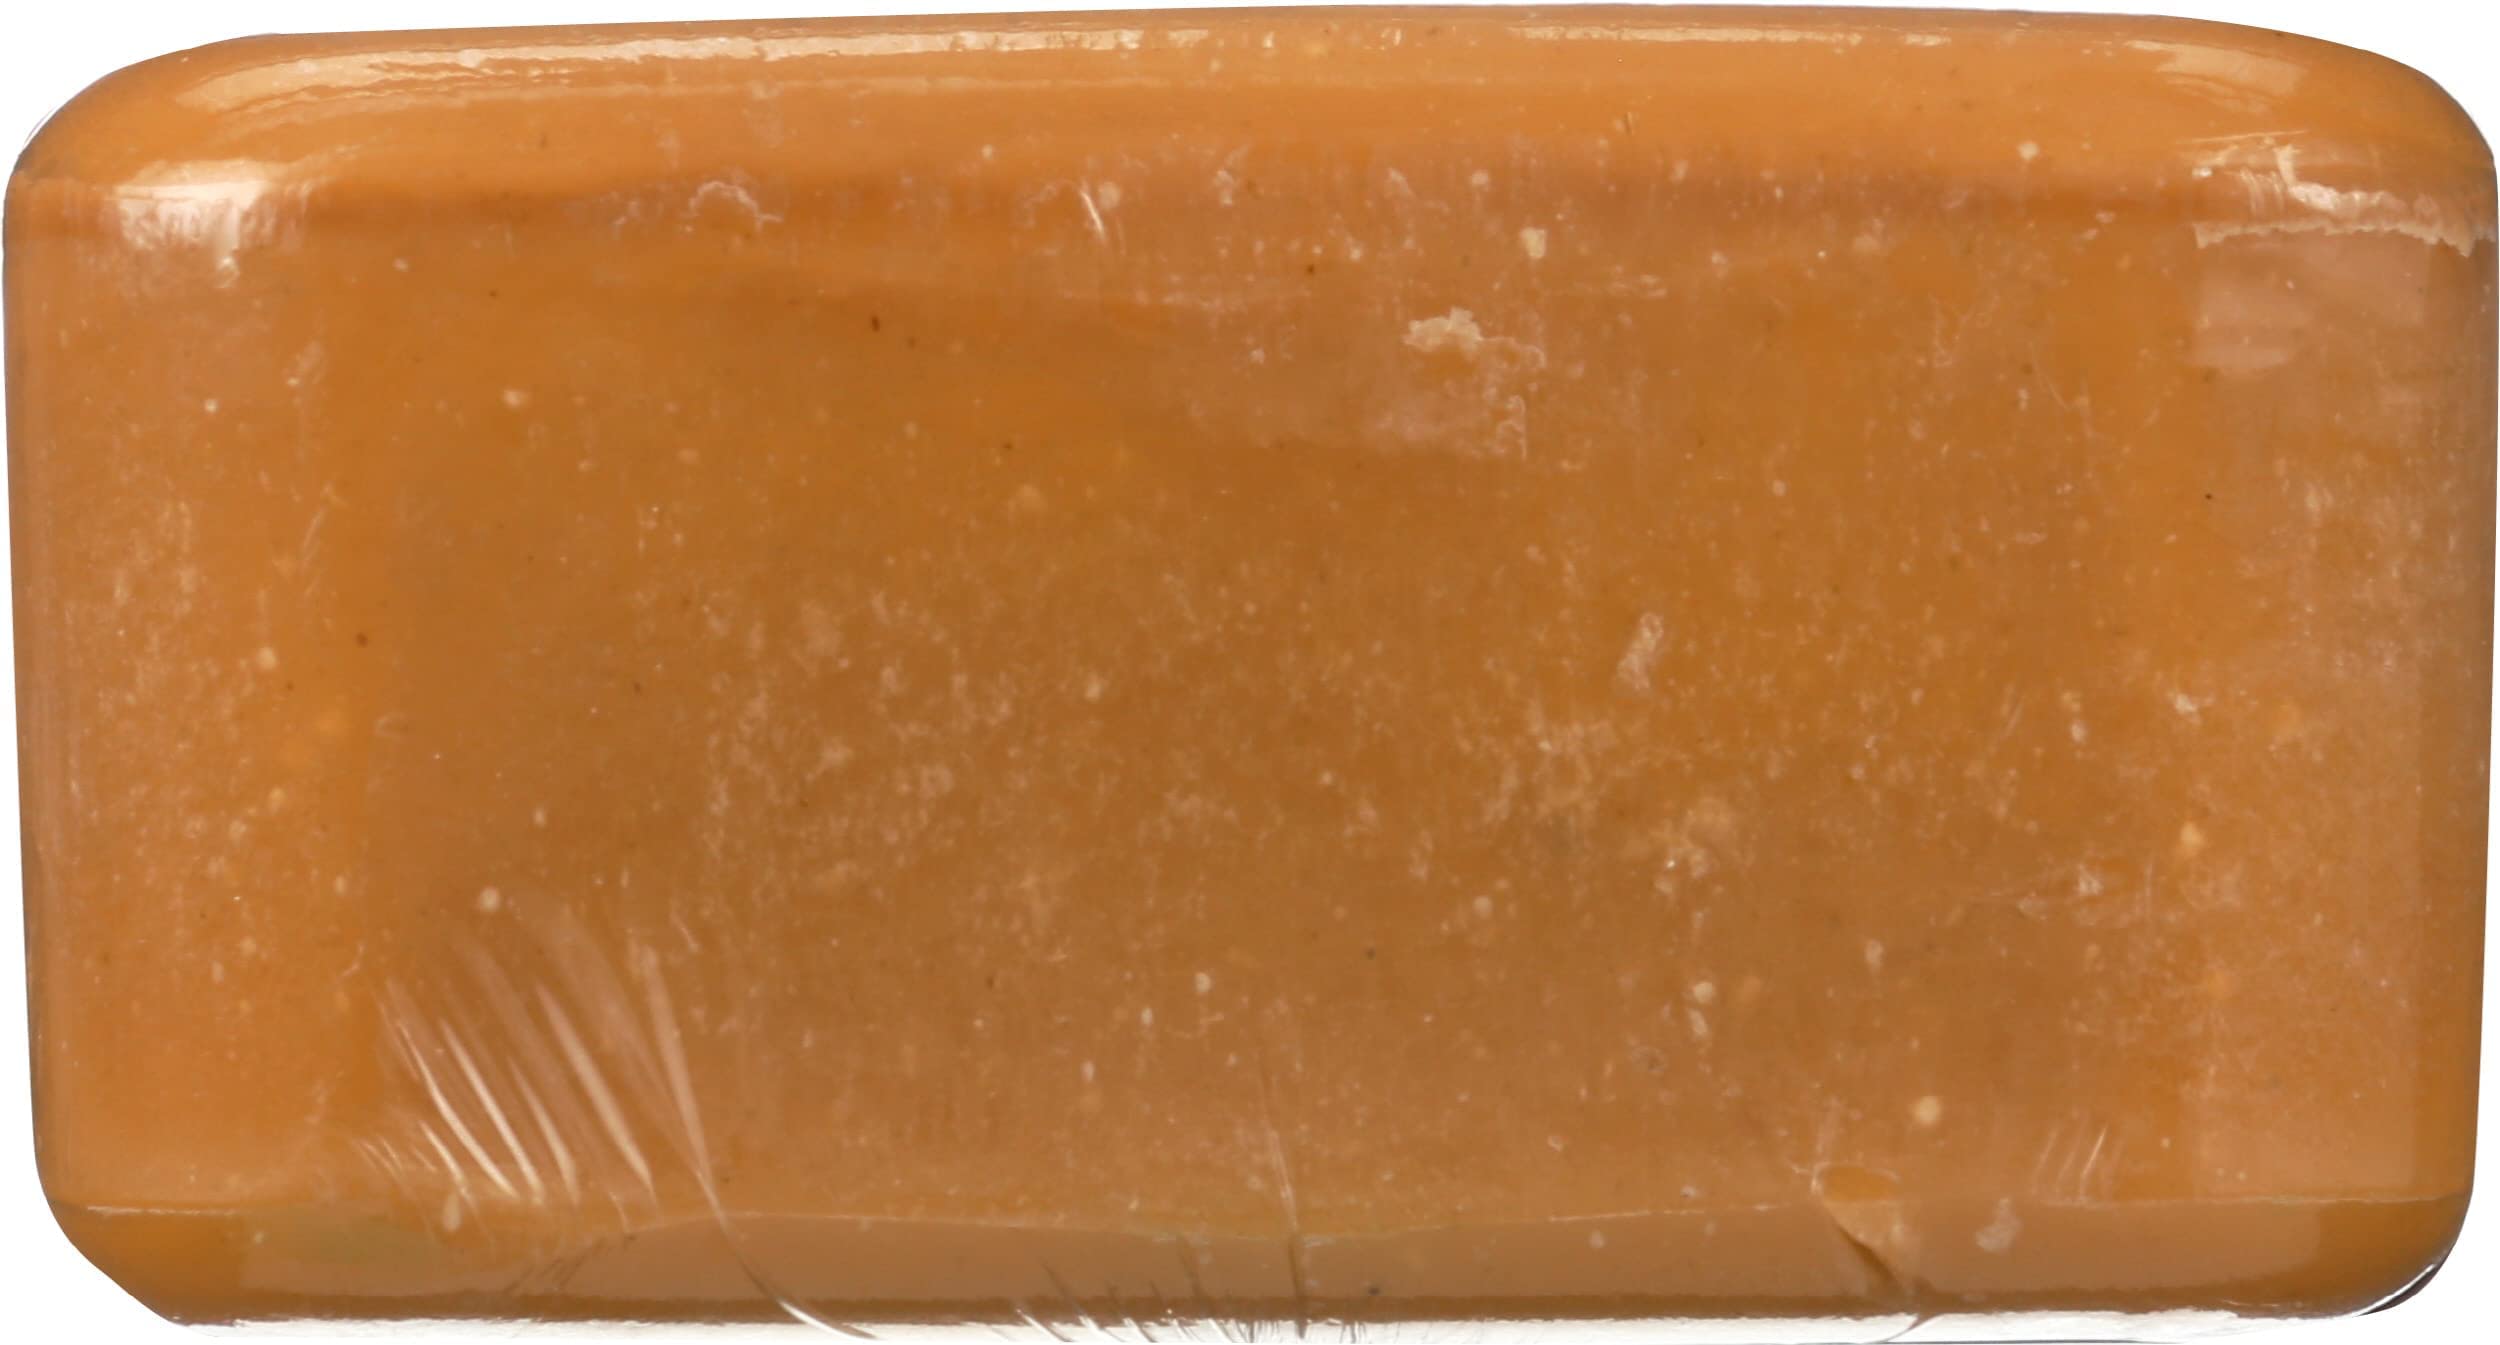 One With Nature Bar Soap, Chamomile and Sulfur, 7 Ounce